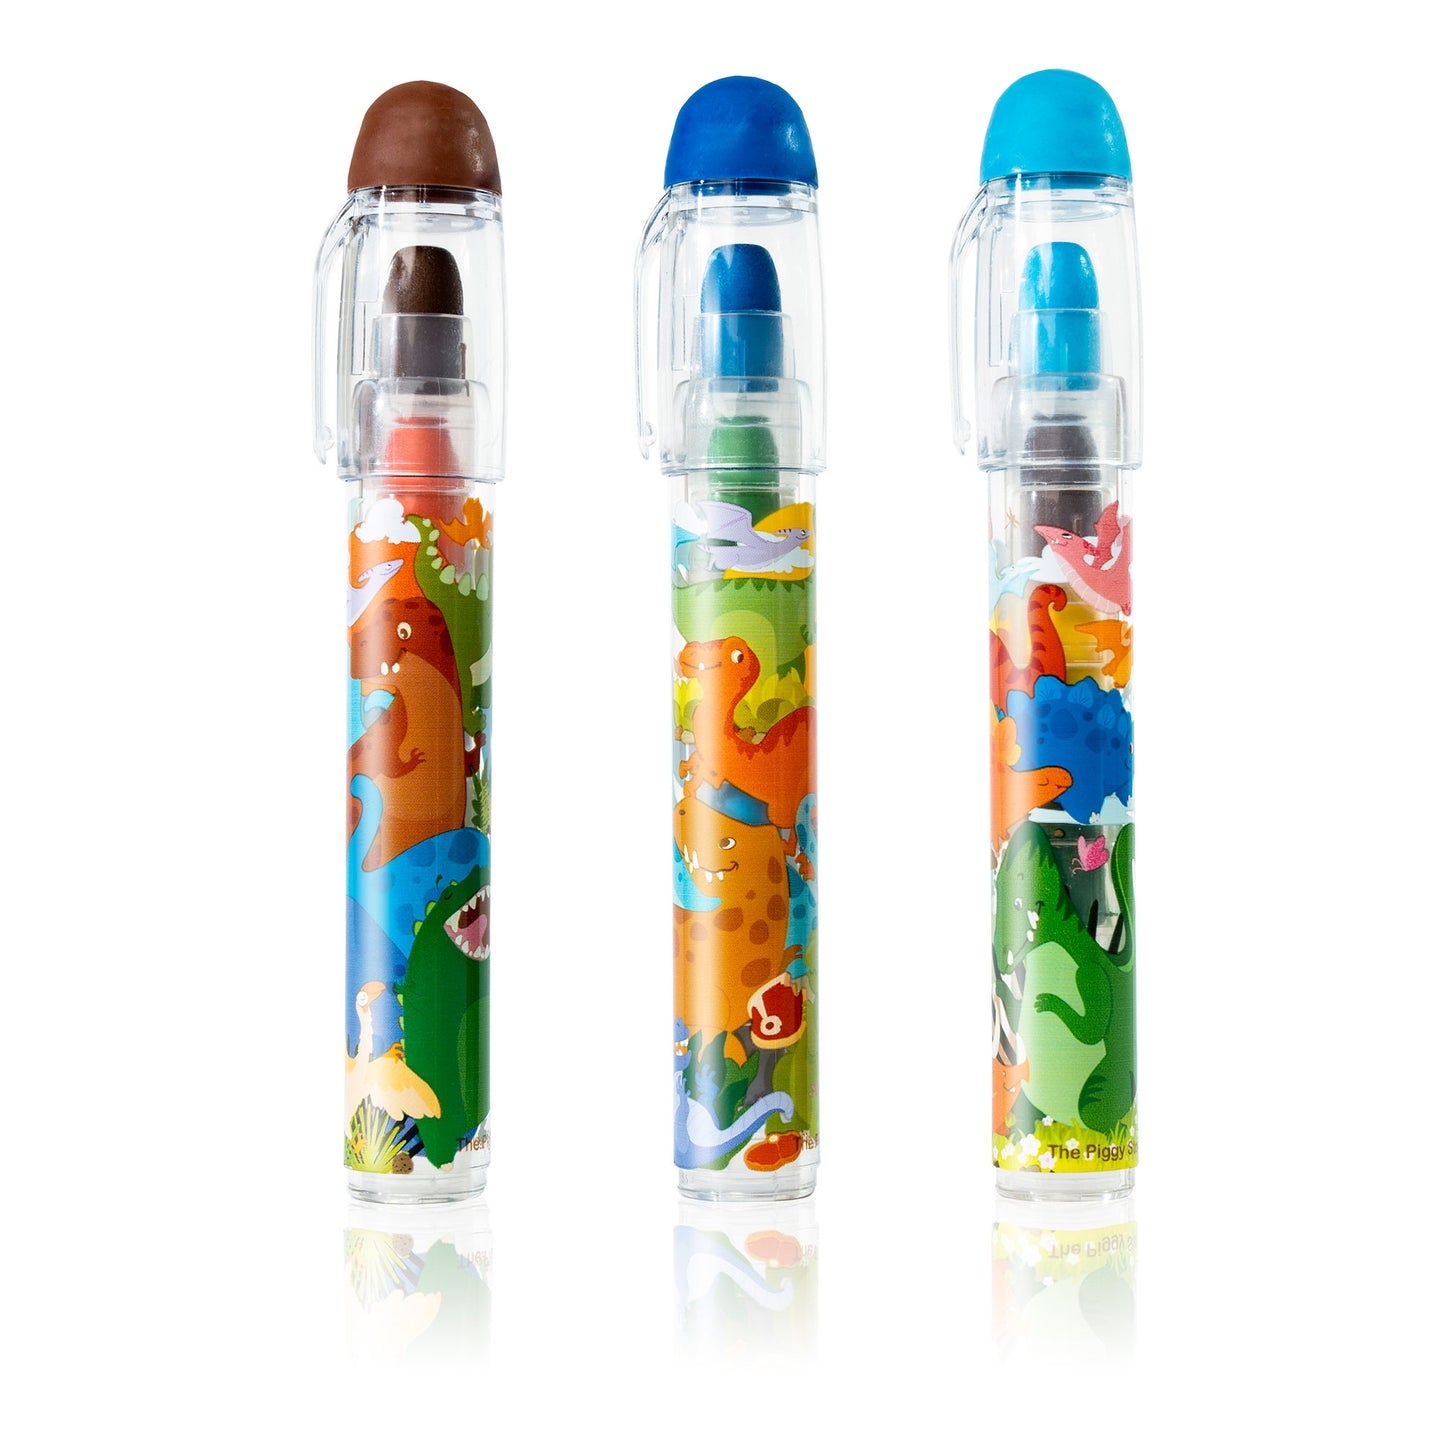 Color Stack To Go Erasable Crayons - Dinosaur World - Twinkle Twinkle Little One